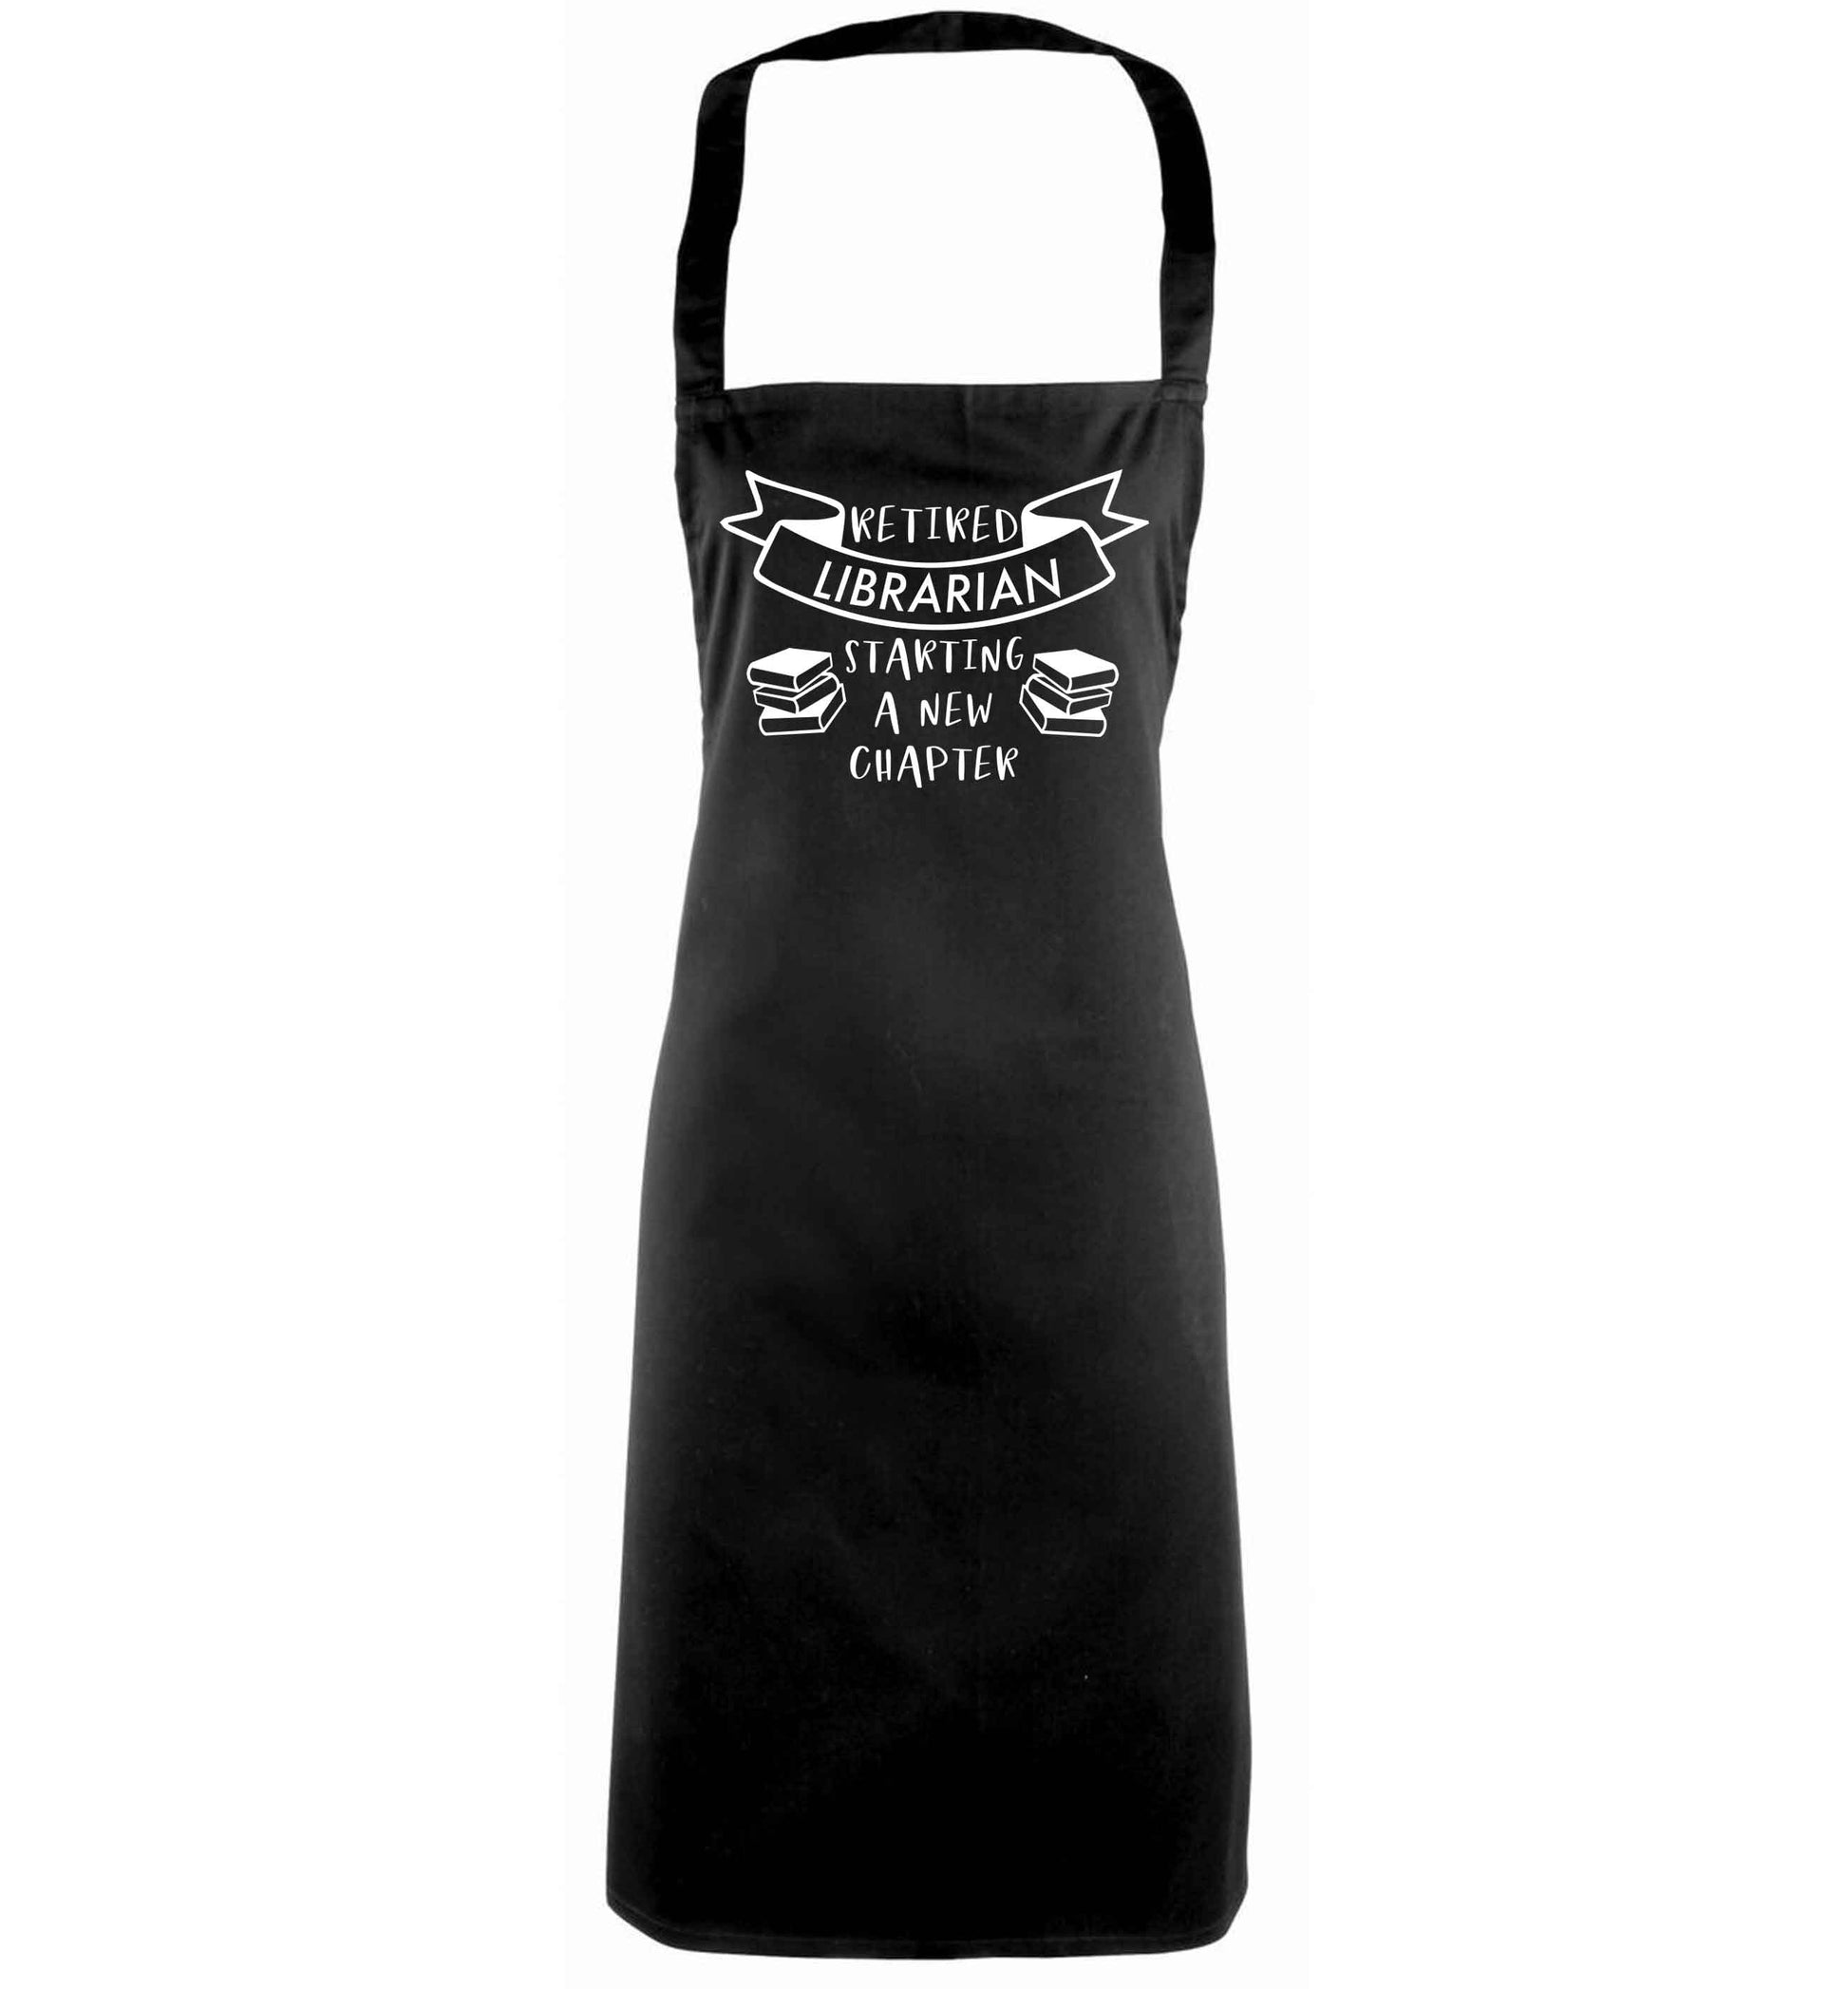 Retired librarian keep your hair on black apron